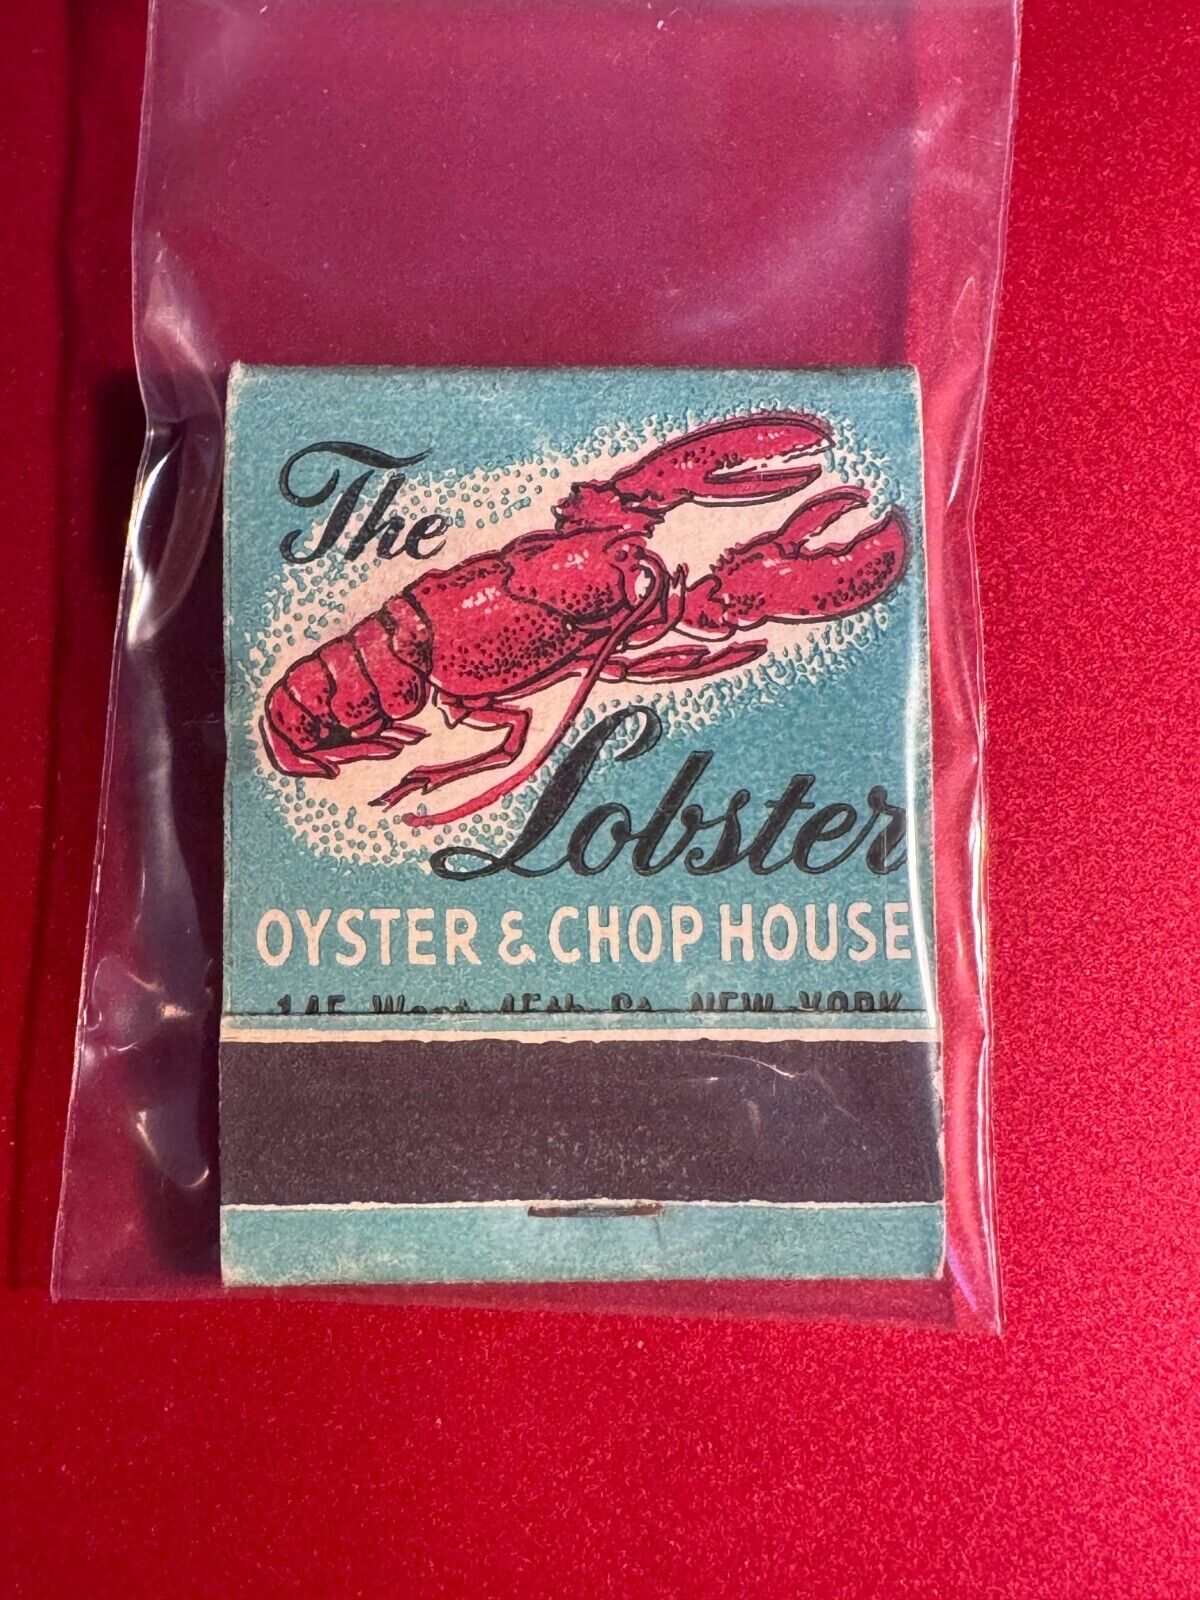 MATCHBOOK - THE LOBSTER - OYSTER & CHOP HOUSE - NEW YORK, NY - UNSTRUCK